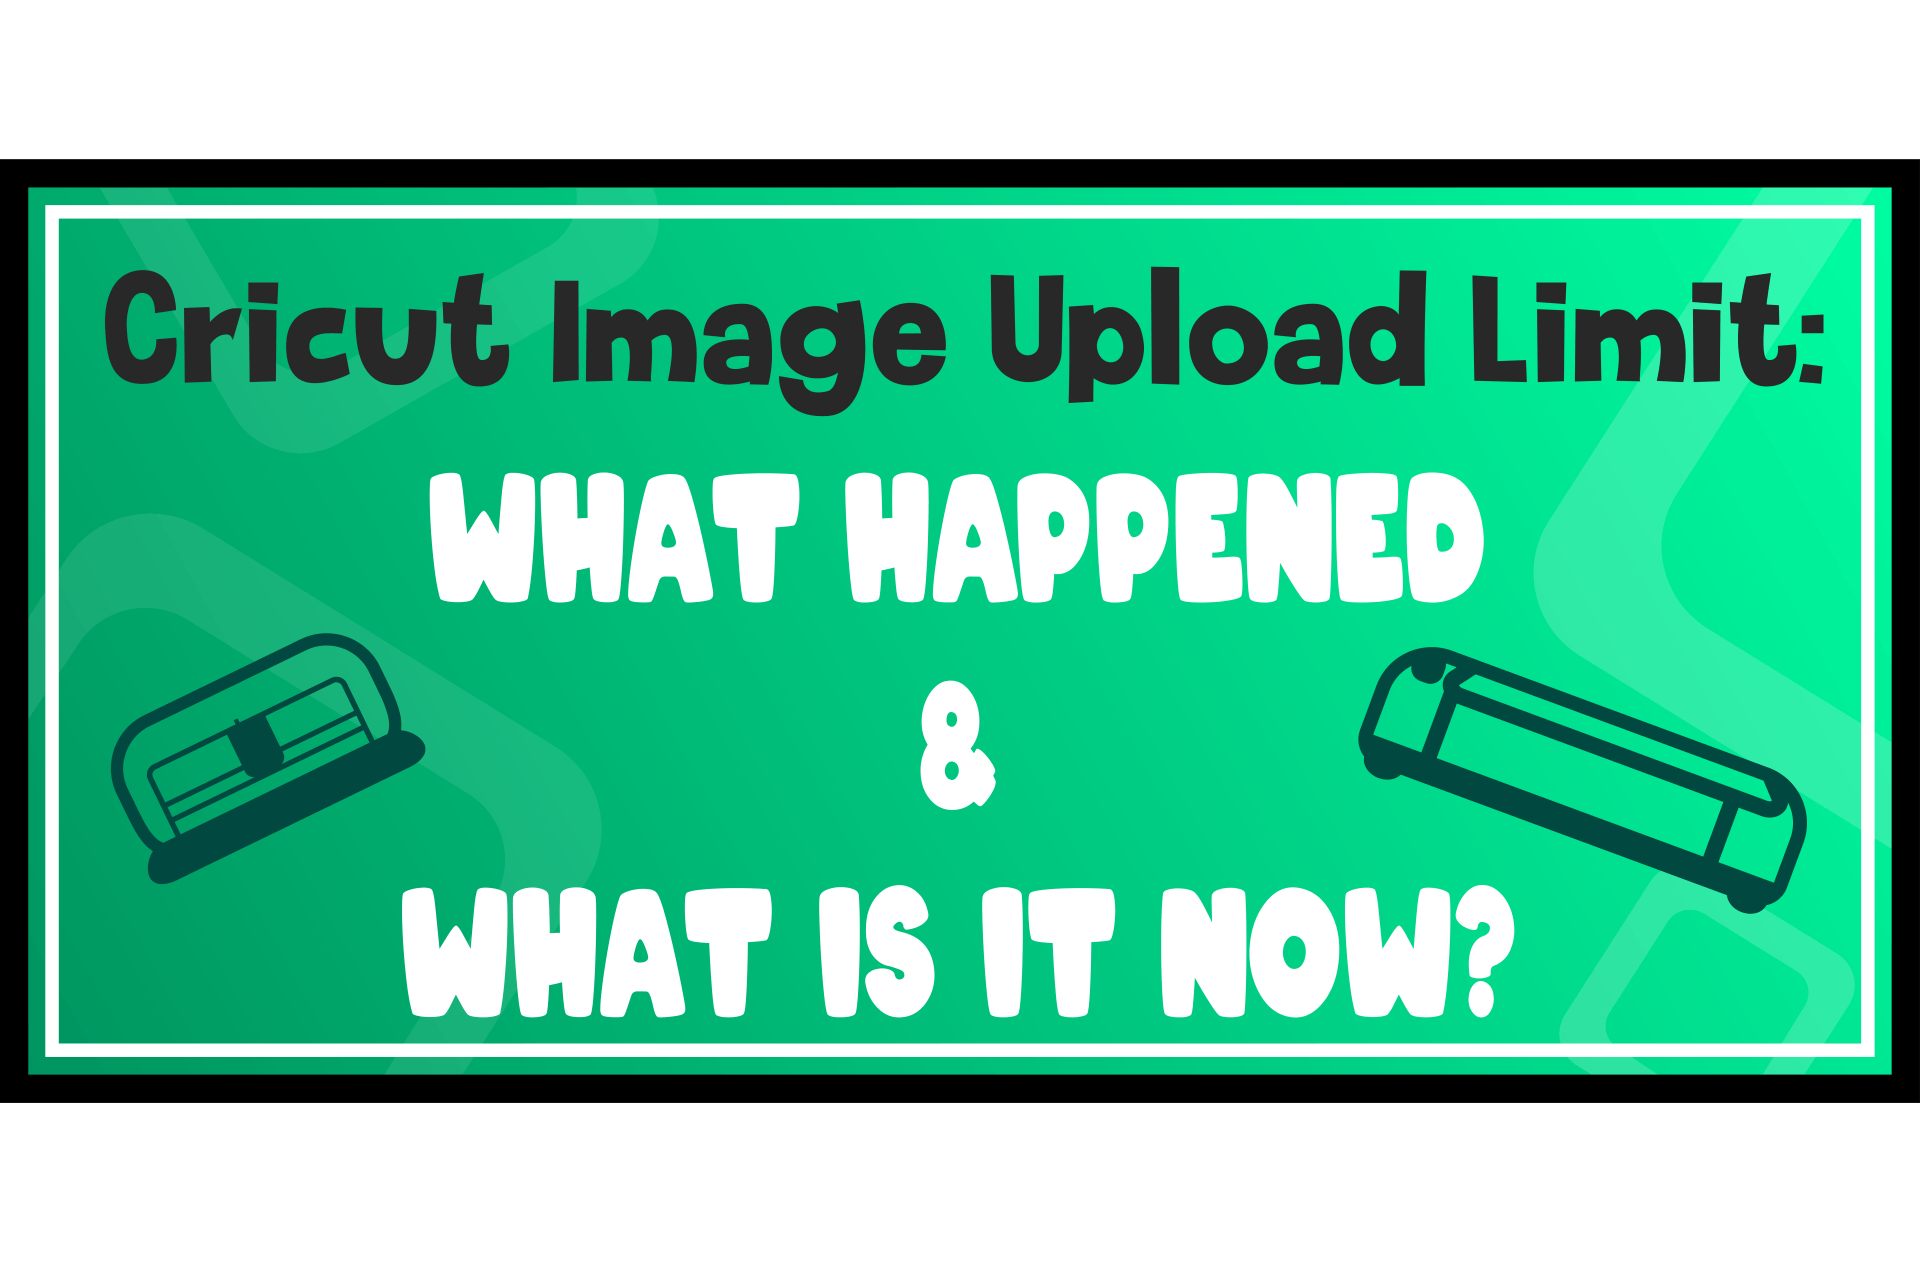 Cricut Image Upload Limit: What Happened and What is it Now?